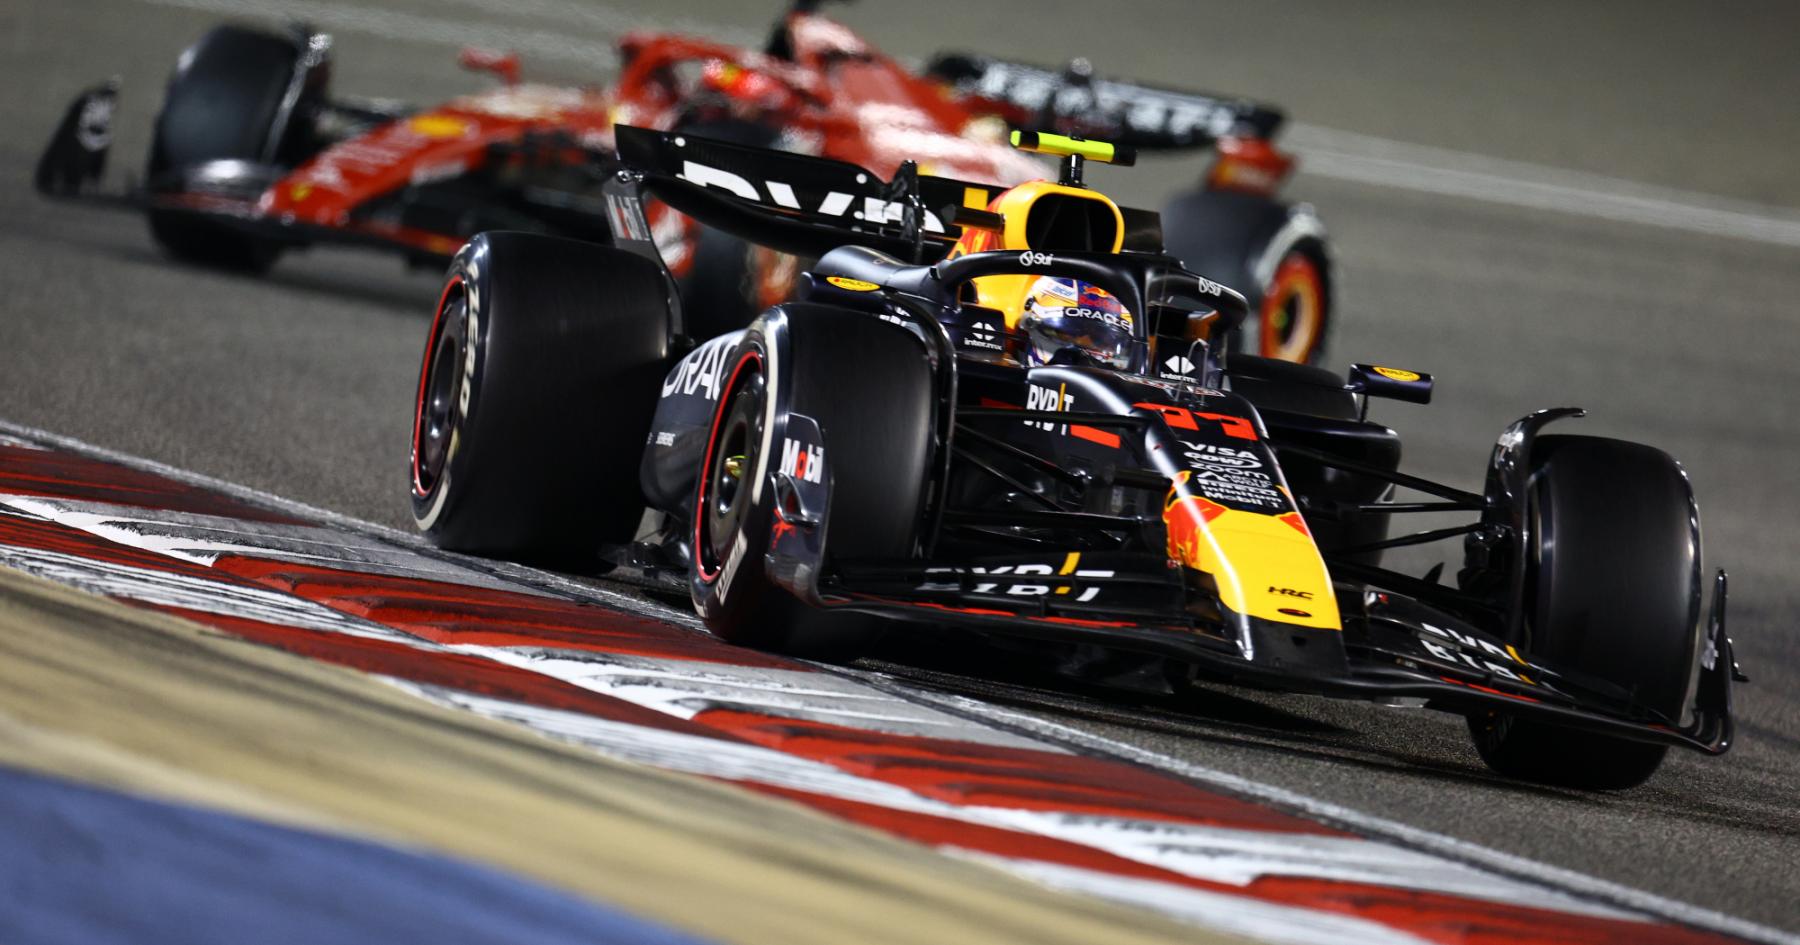 Behind the Glory: Perez Sheds Light on Red Bull's Challenges Despite Dominant Victory